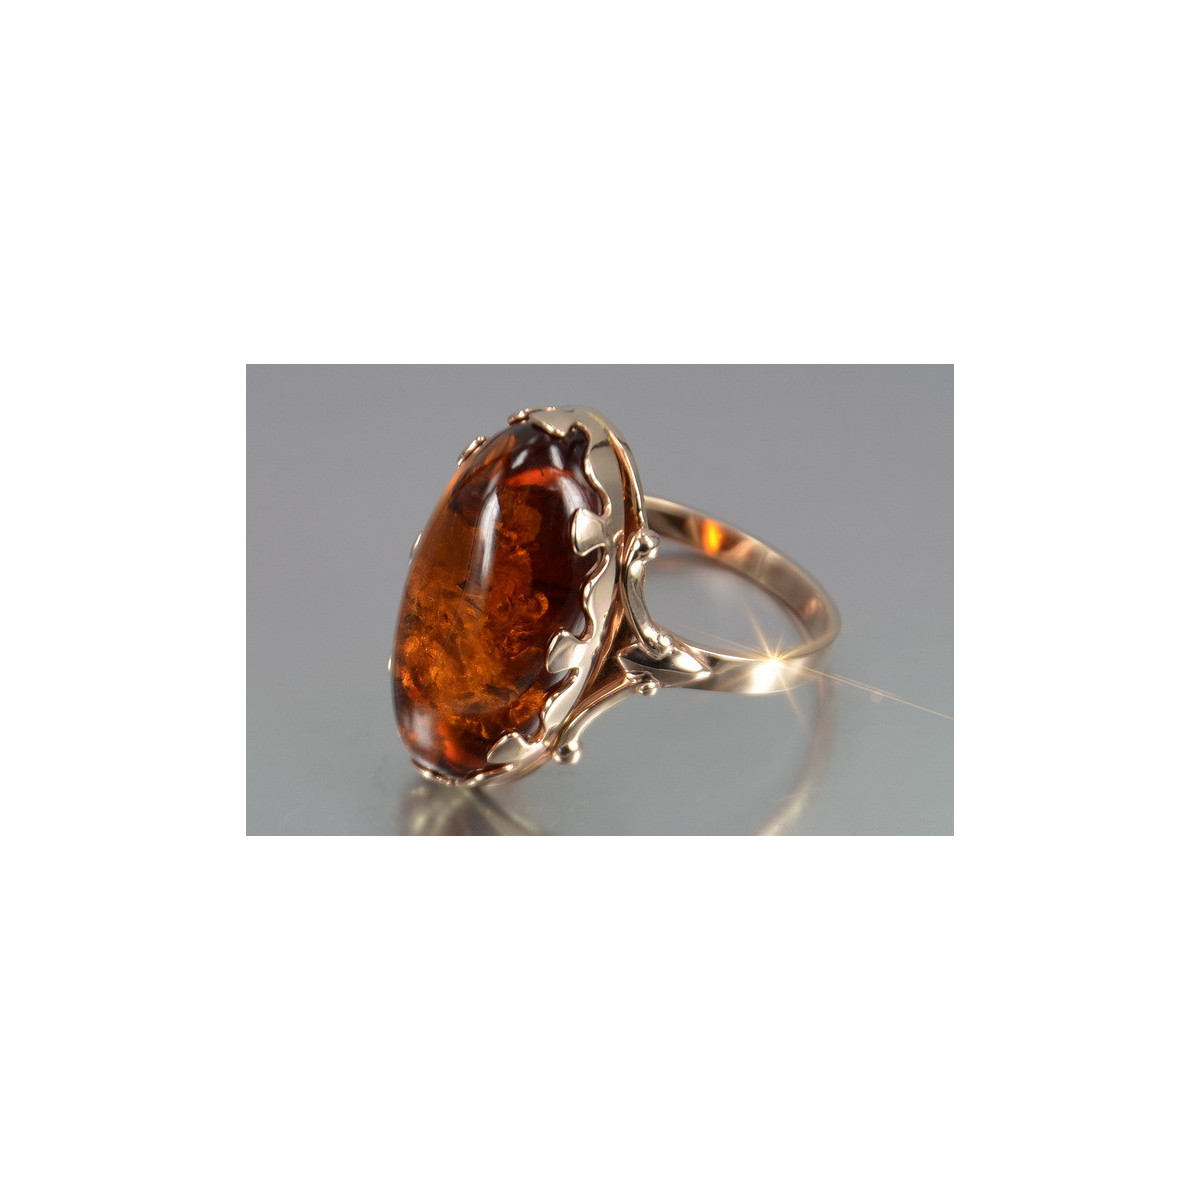 Russian rose Soviet pink USSR red 585 583 gold amber ring vrab052